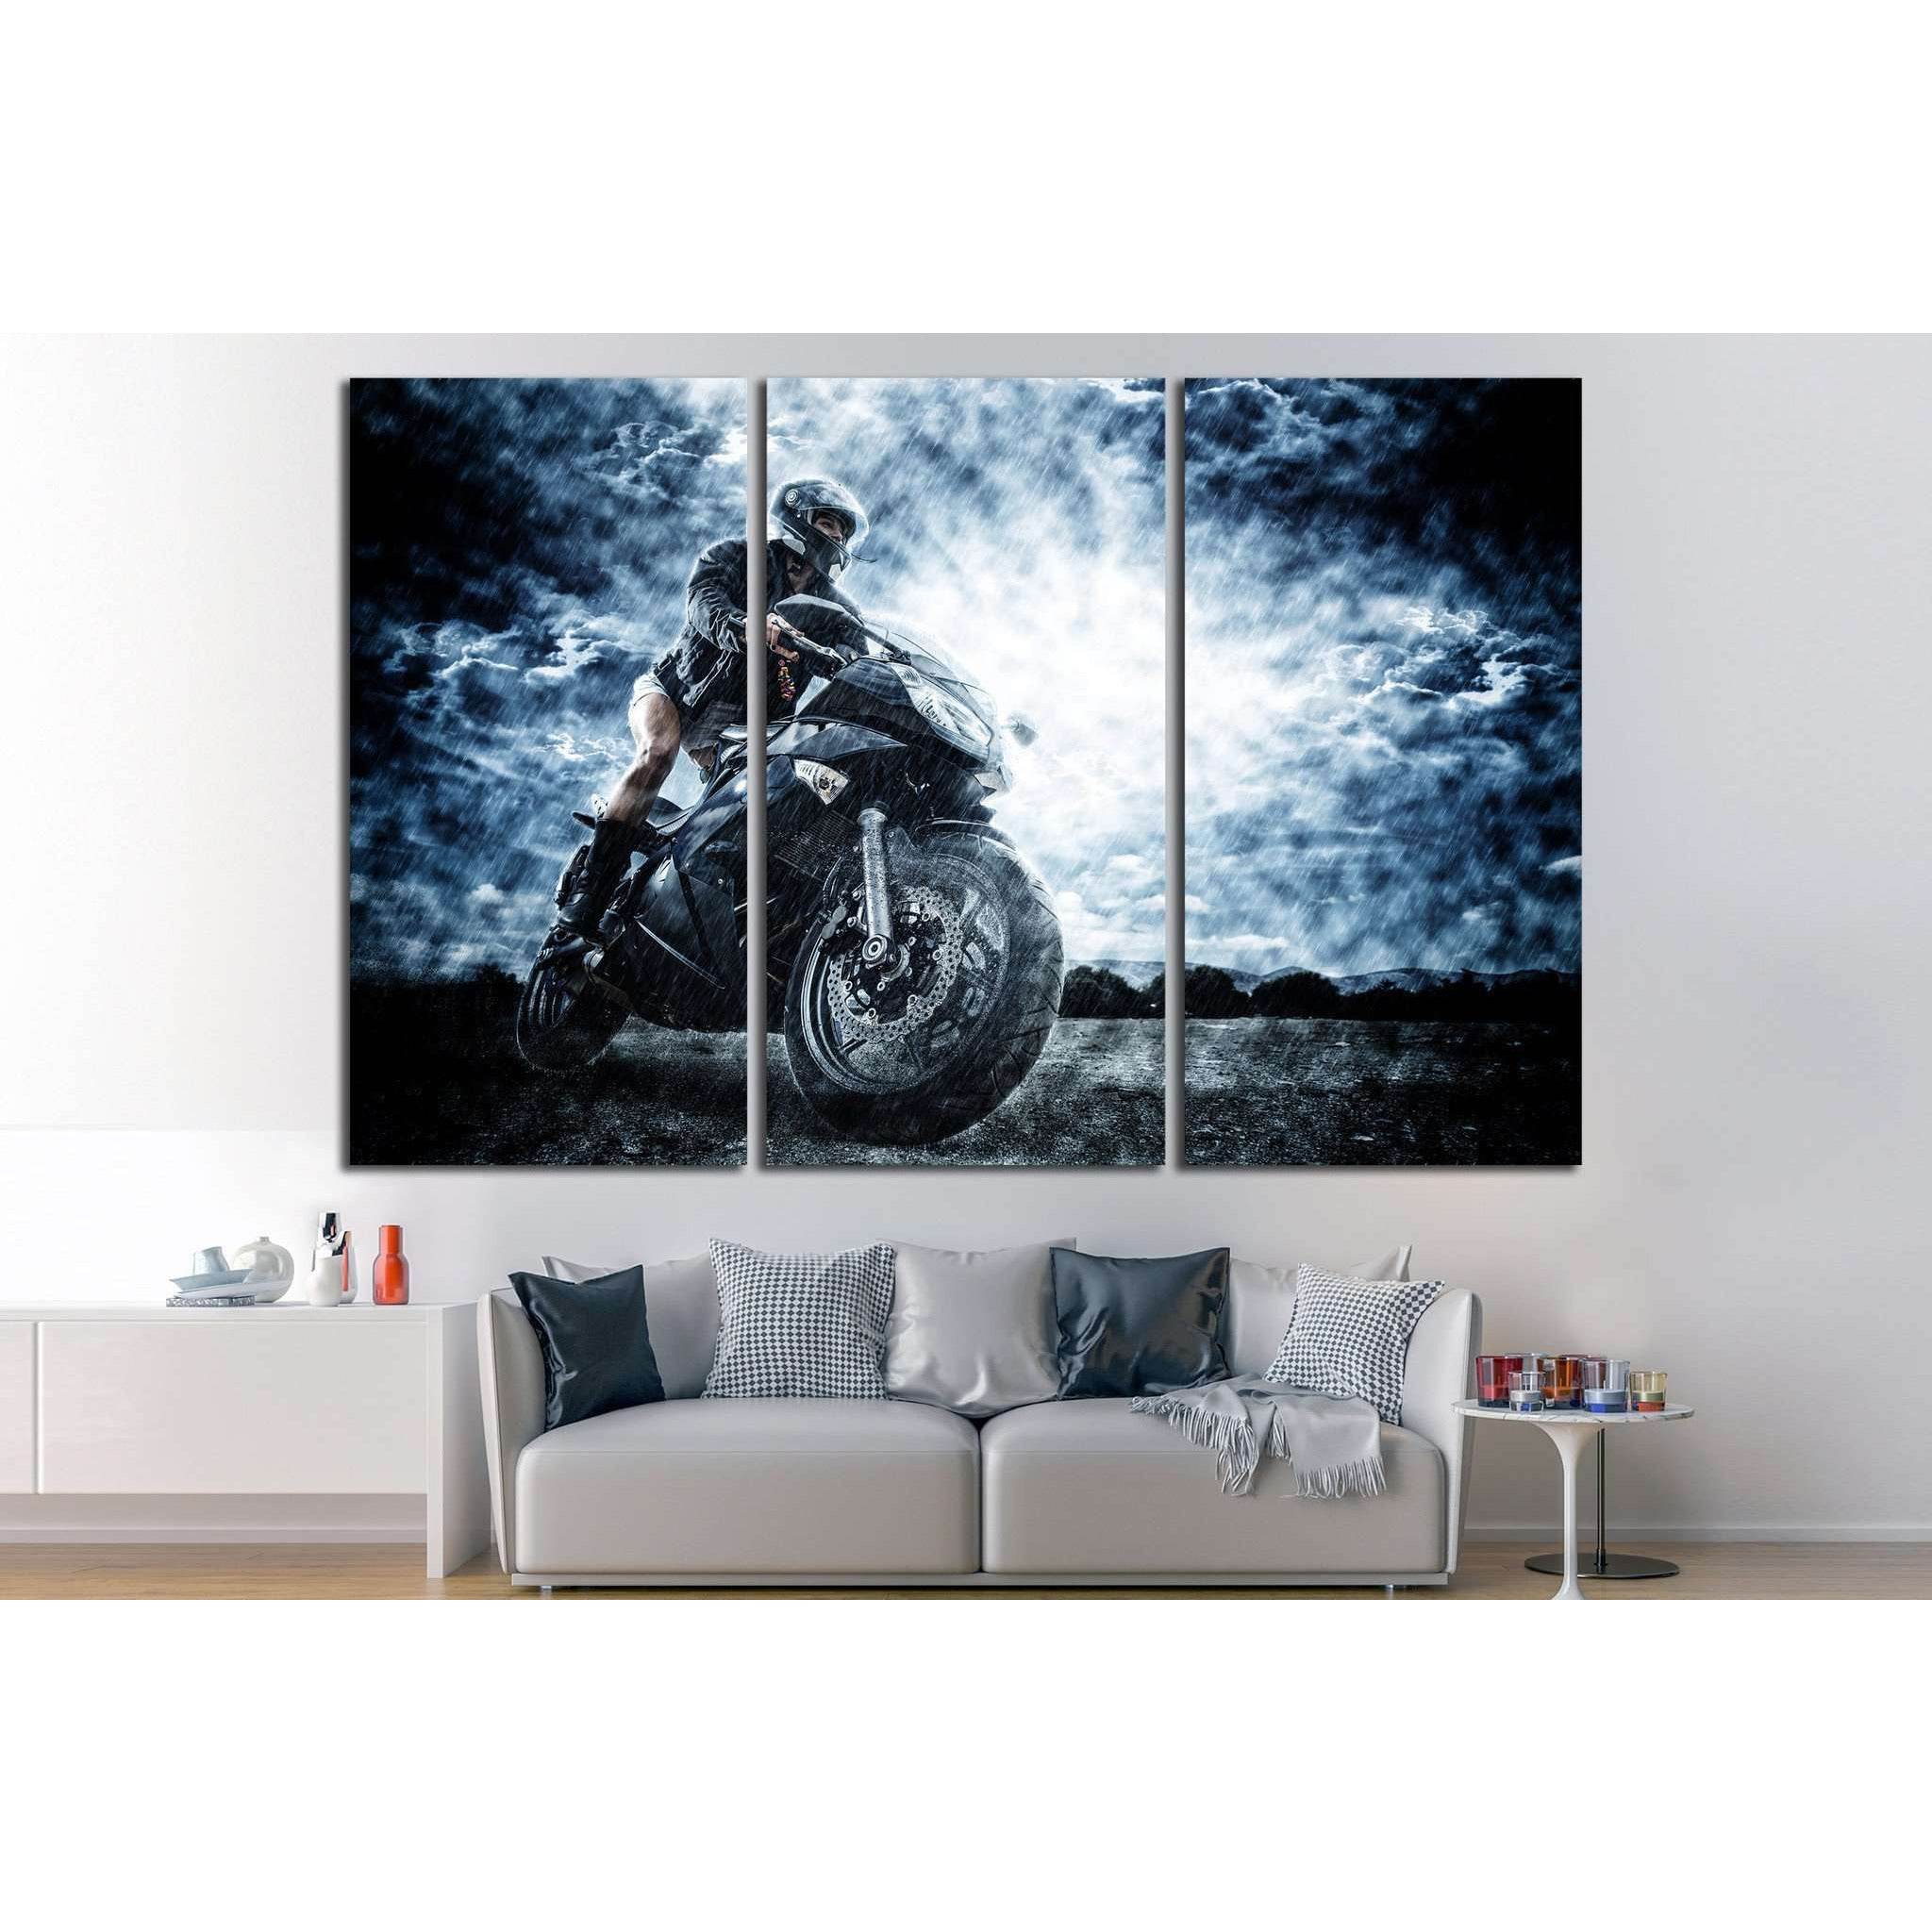 Sexy motorbike female rider №1869 Ready to Hang Canvas Print